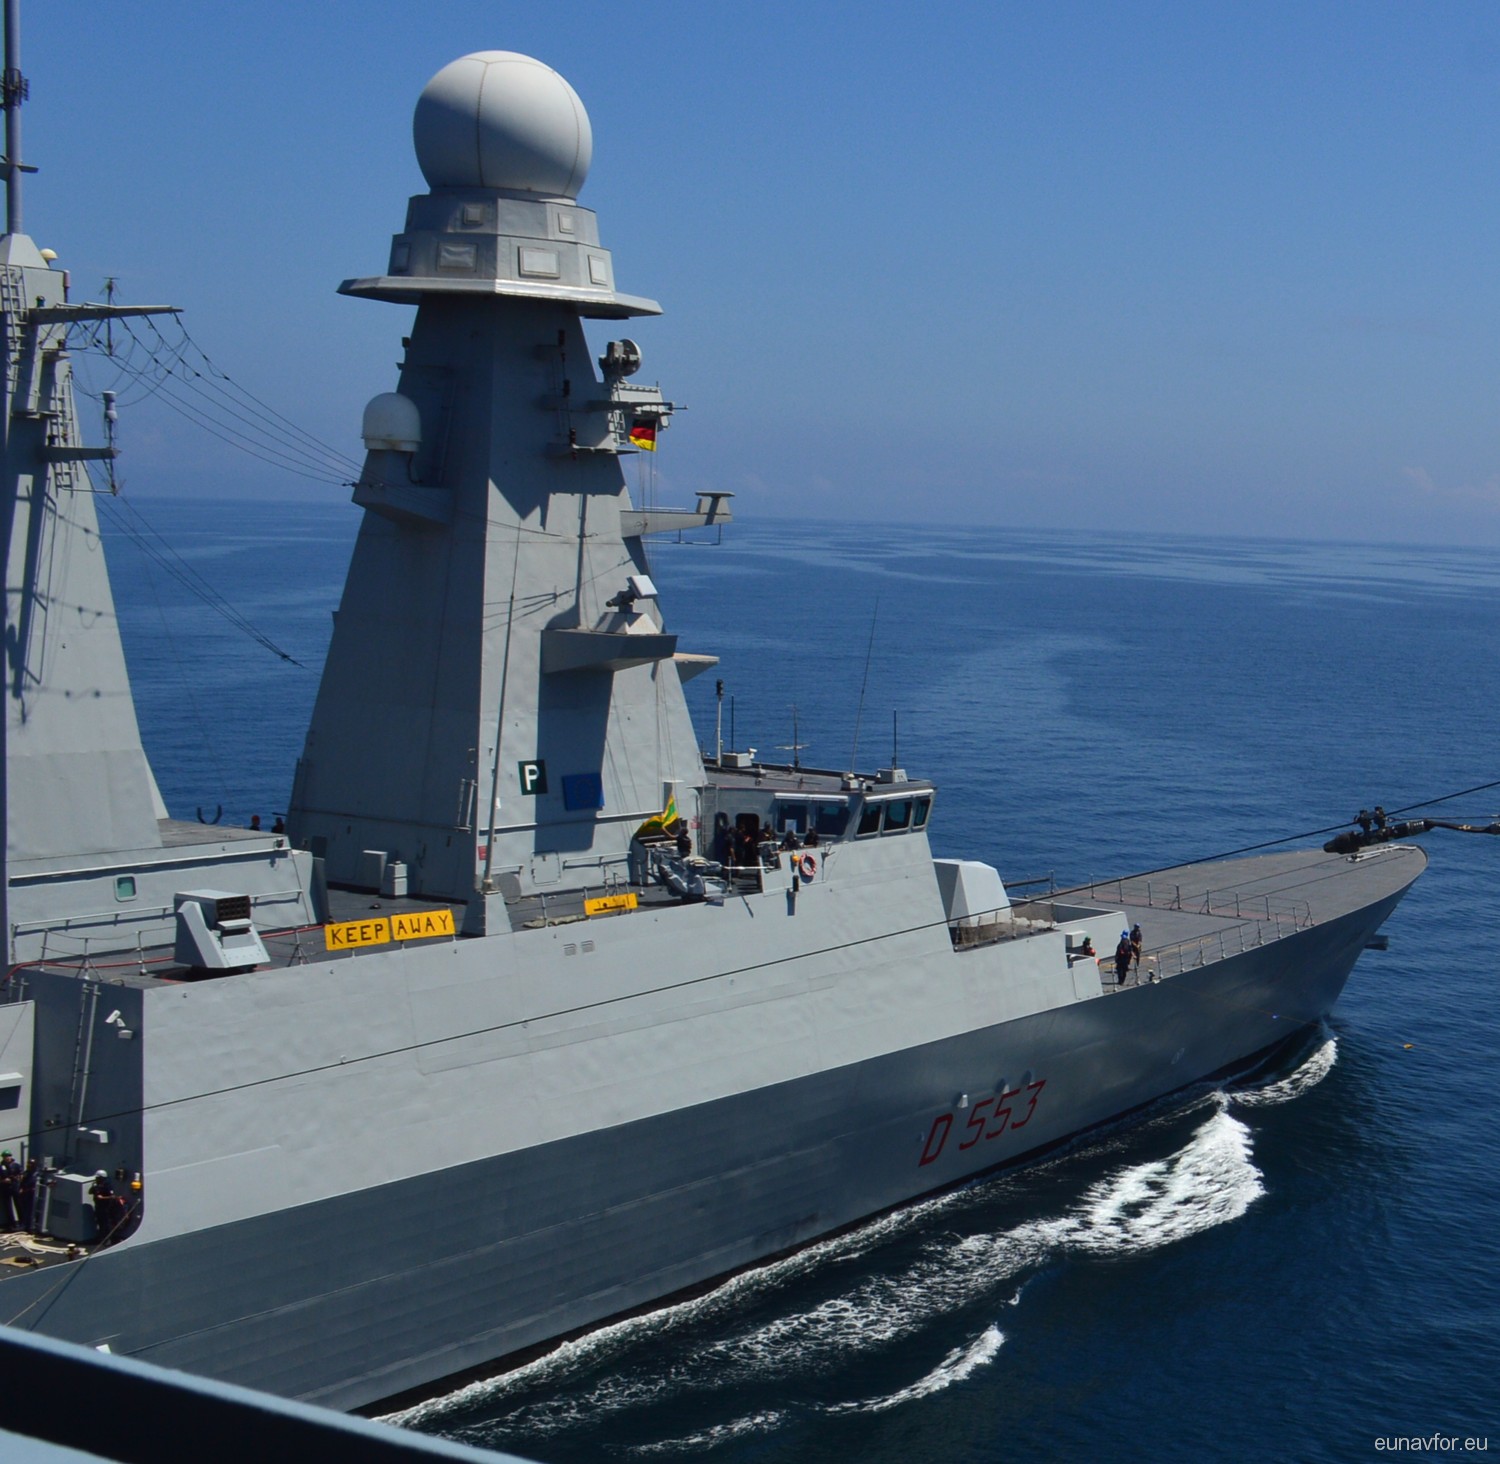 d-553 its andrea doria guided missile destroyer ddgh horizon class italian navy 34 eunavfor